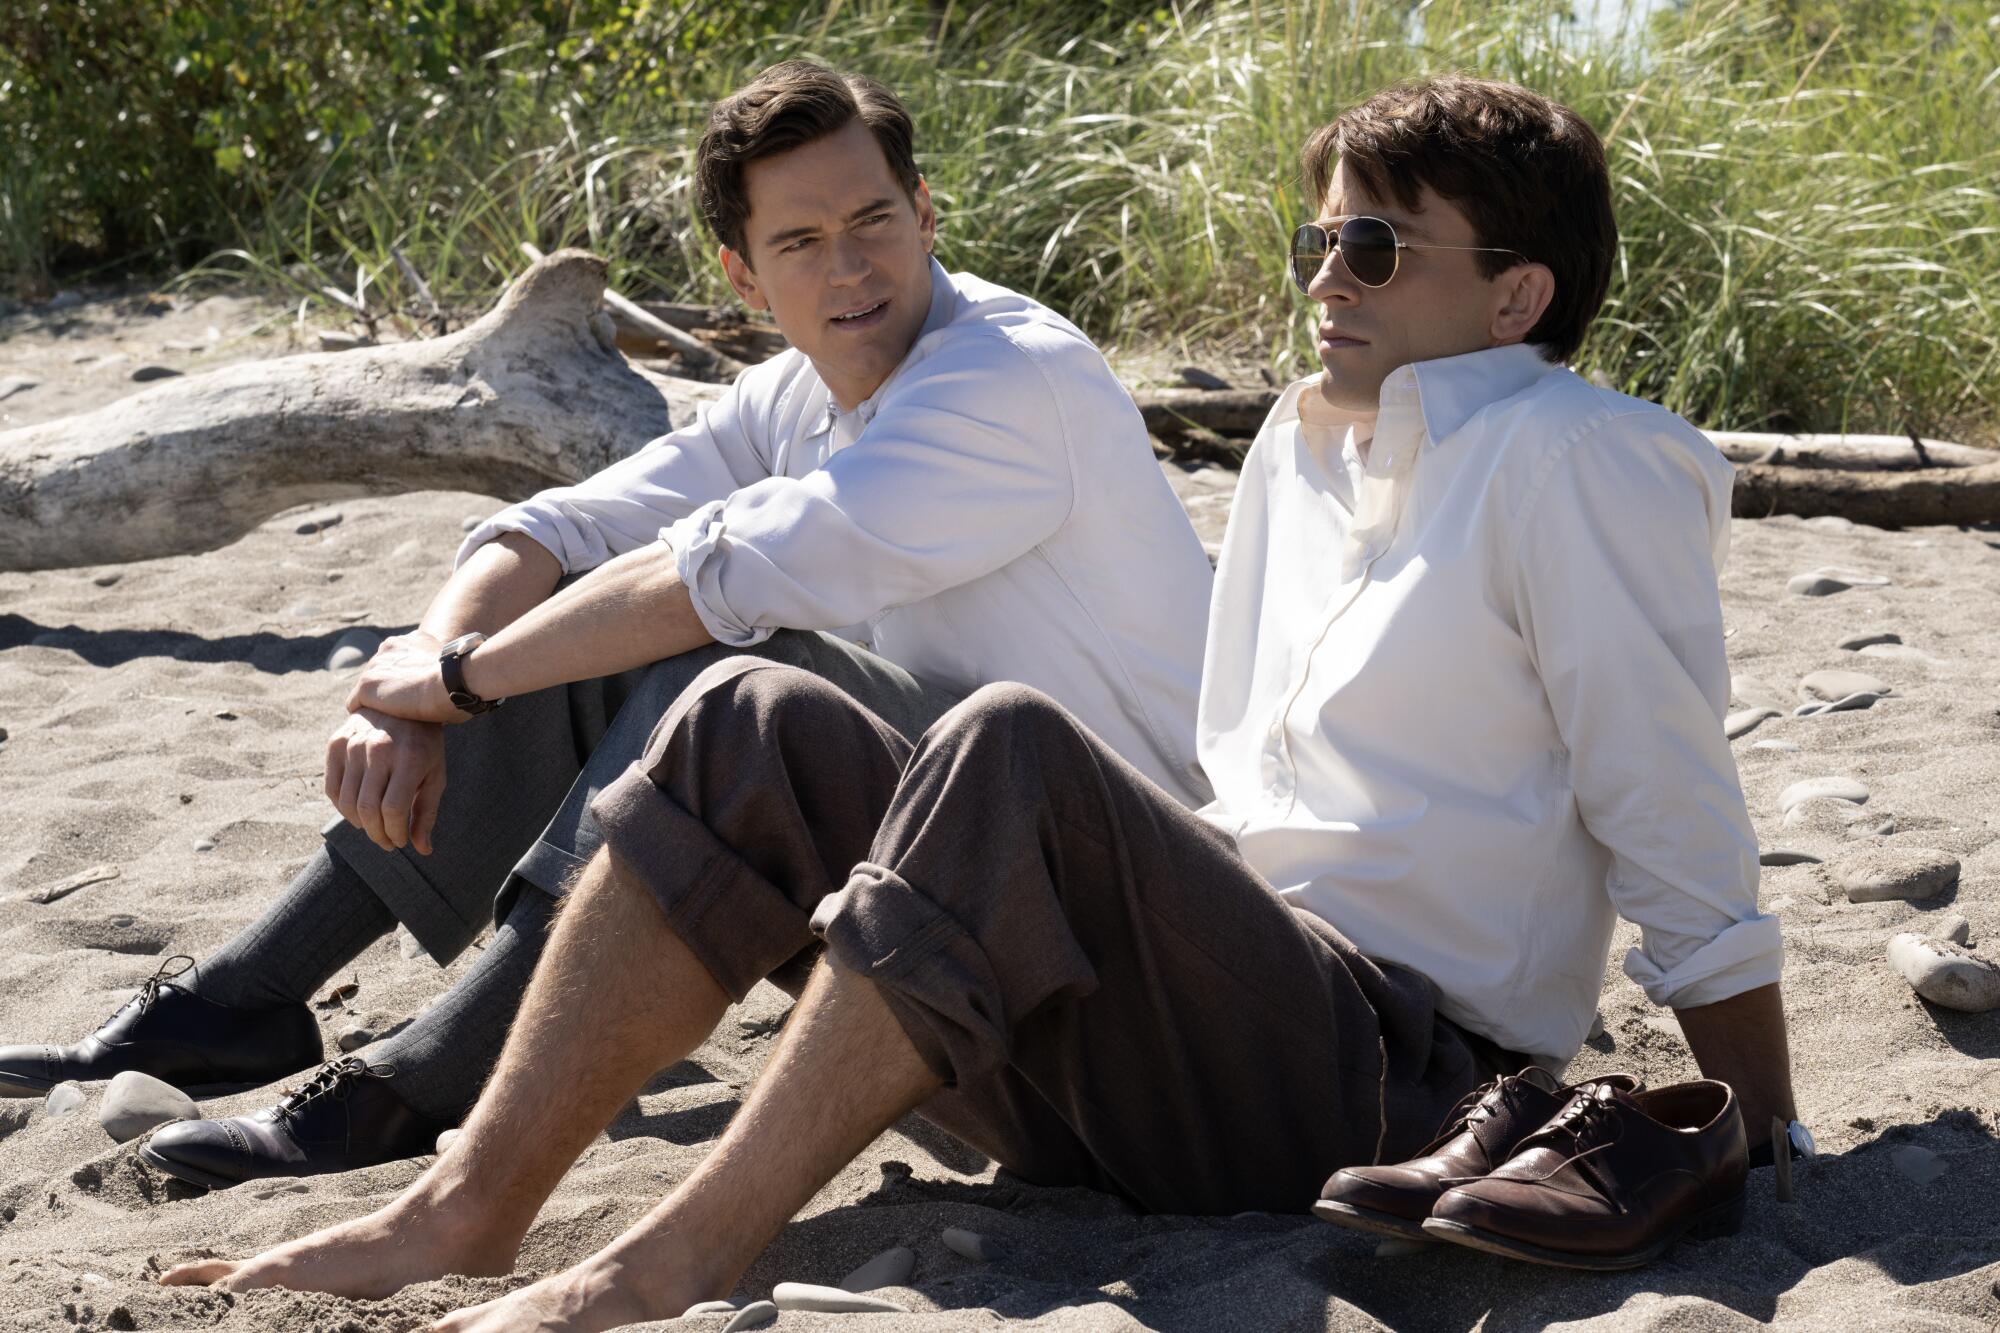 Two men in dress shirts and slacks sit on the beach talking in "Fellow Travelers."